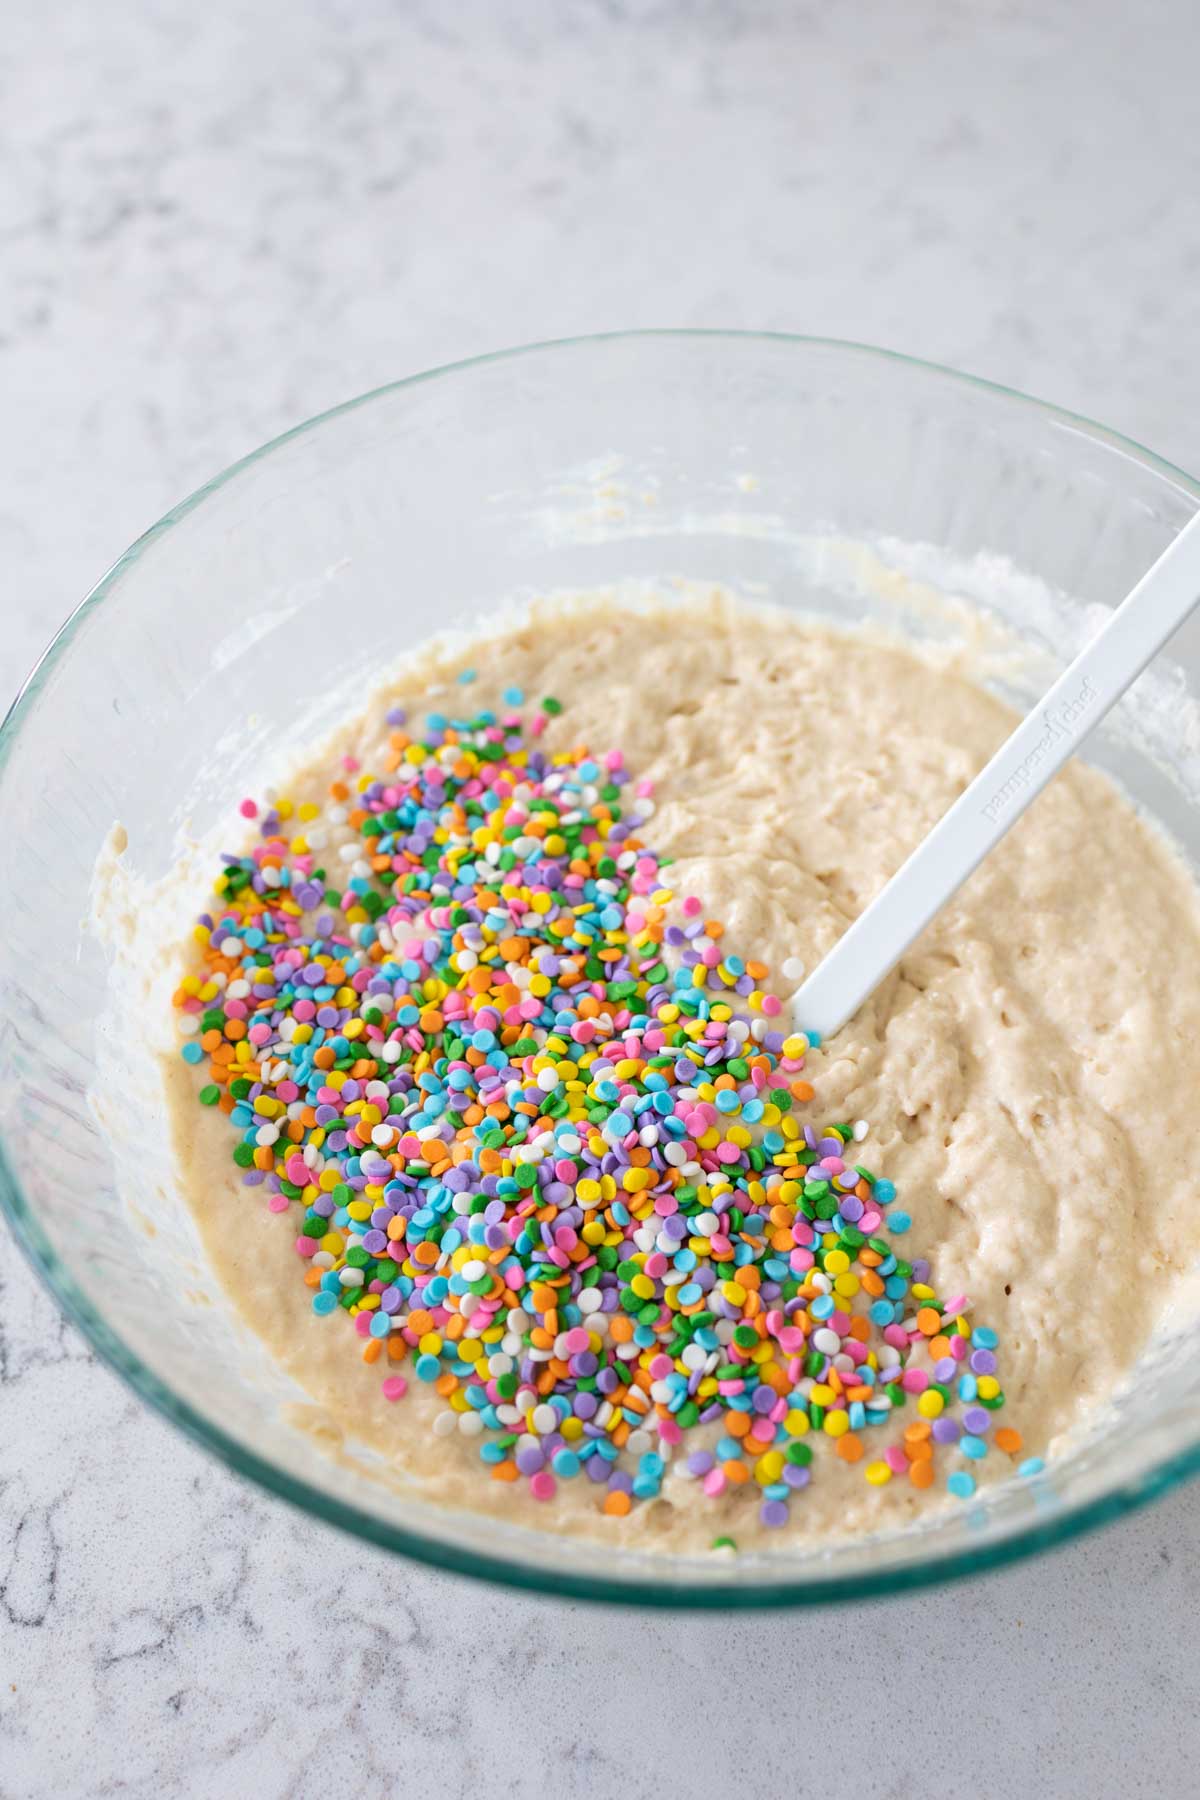 The waffle batter has been covered in sprinkles.